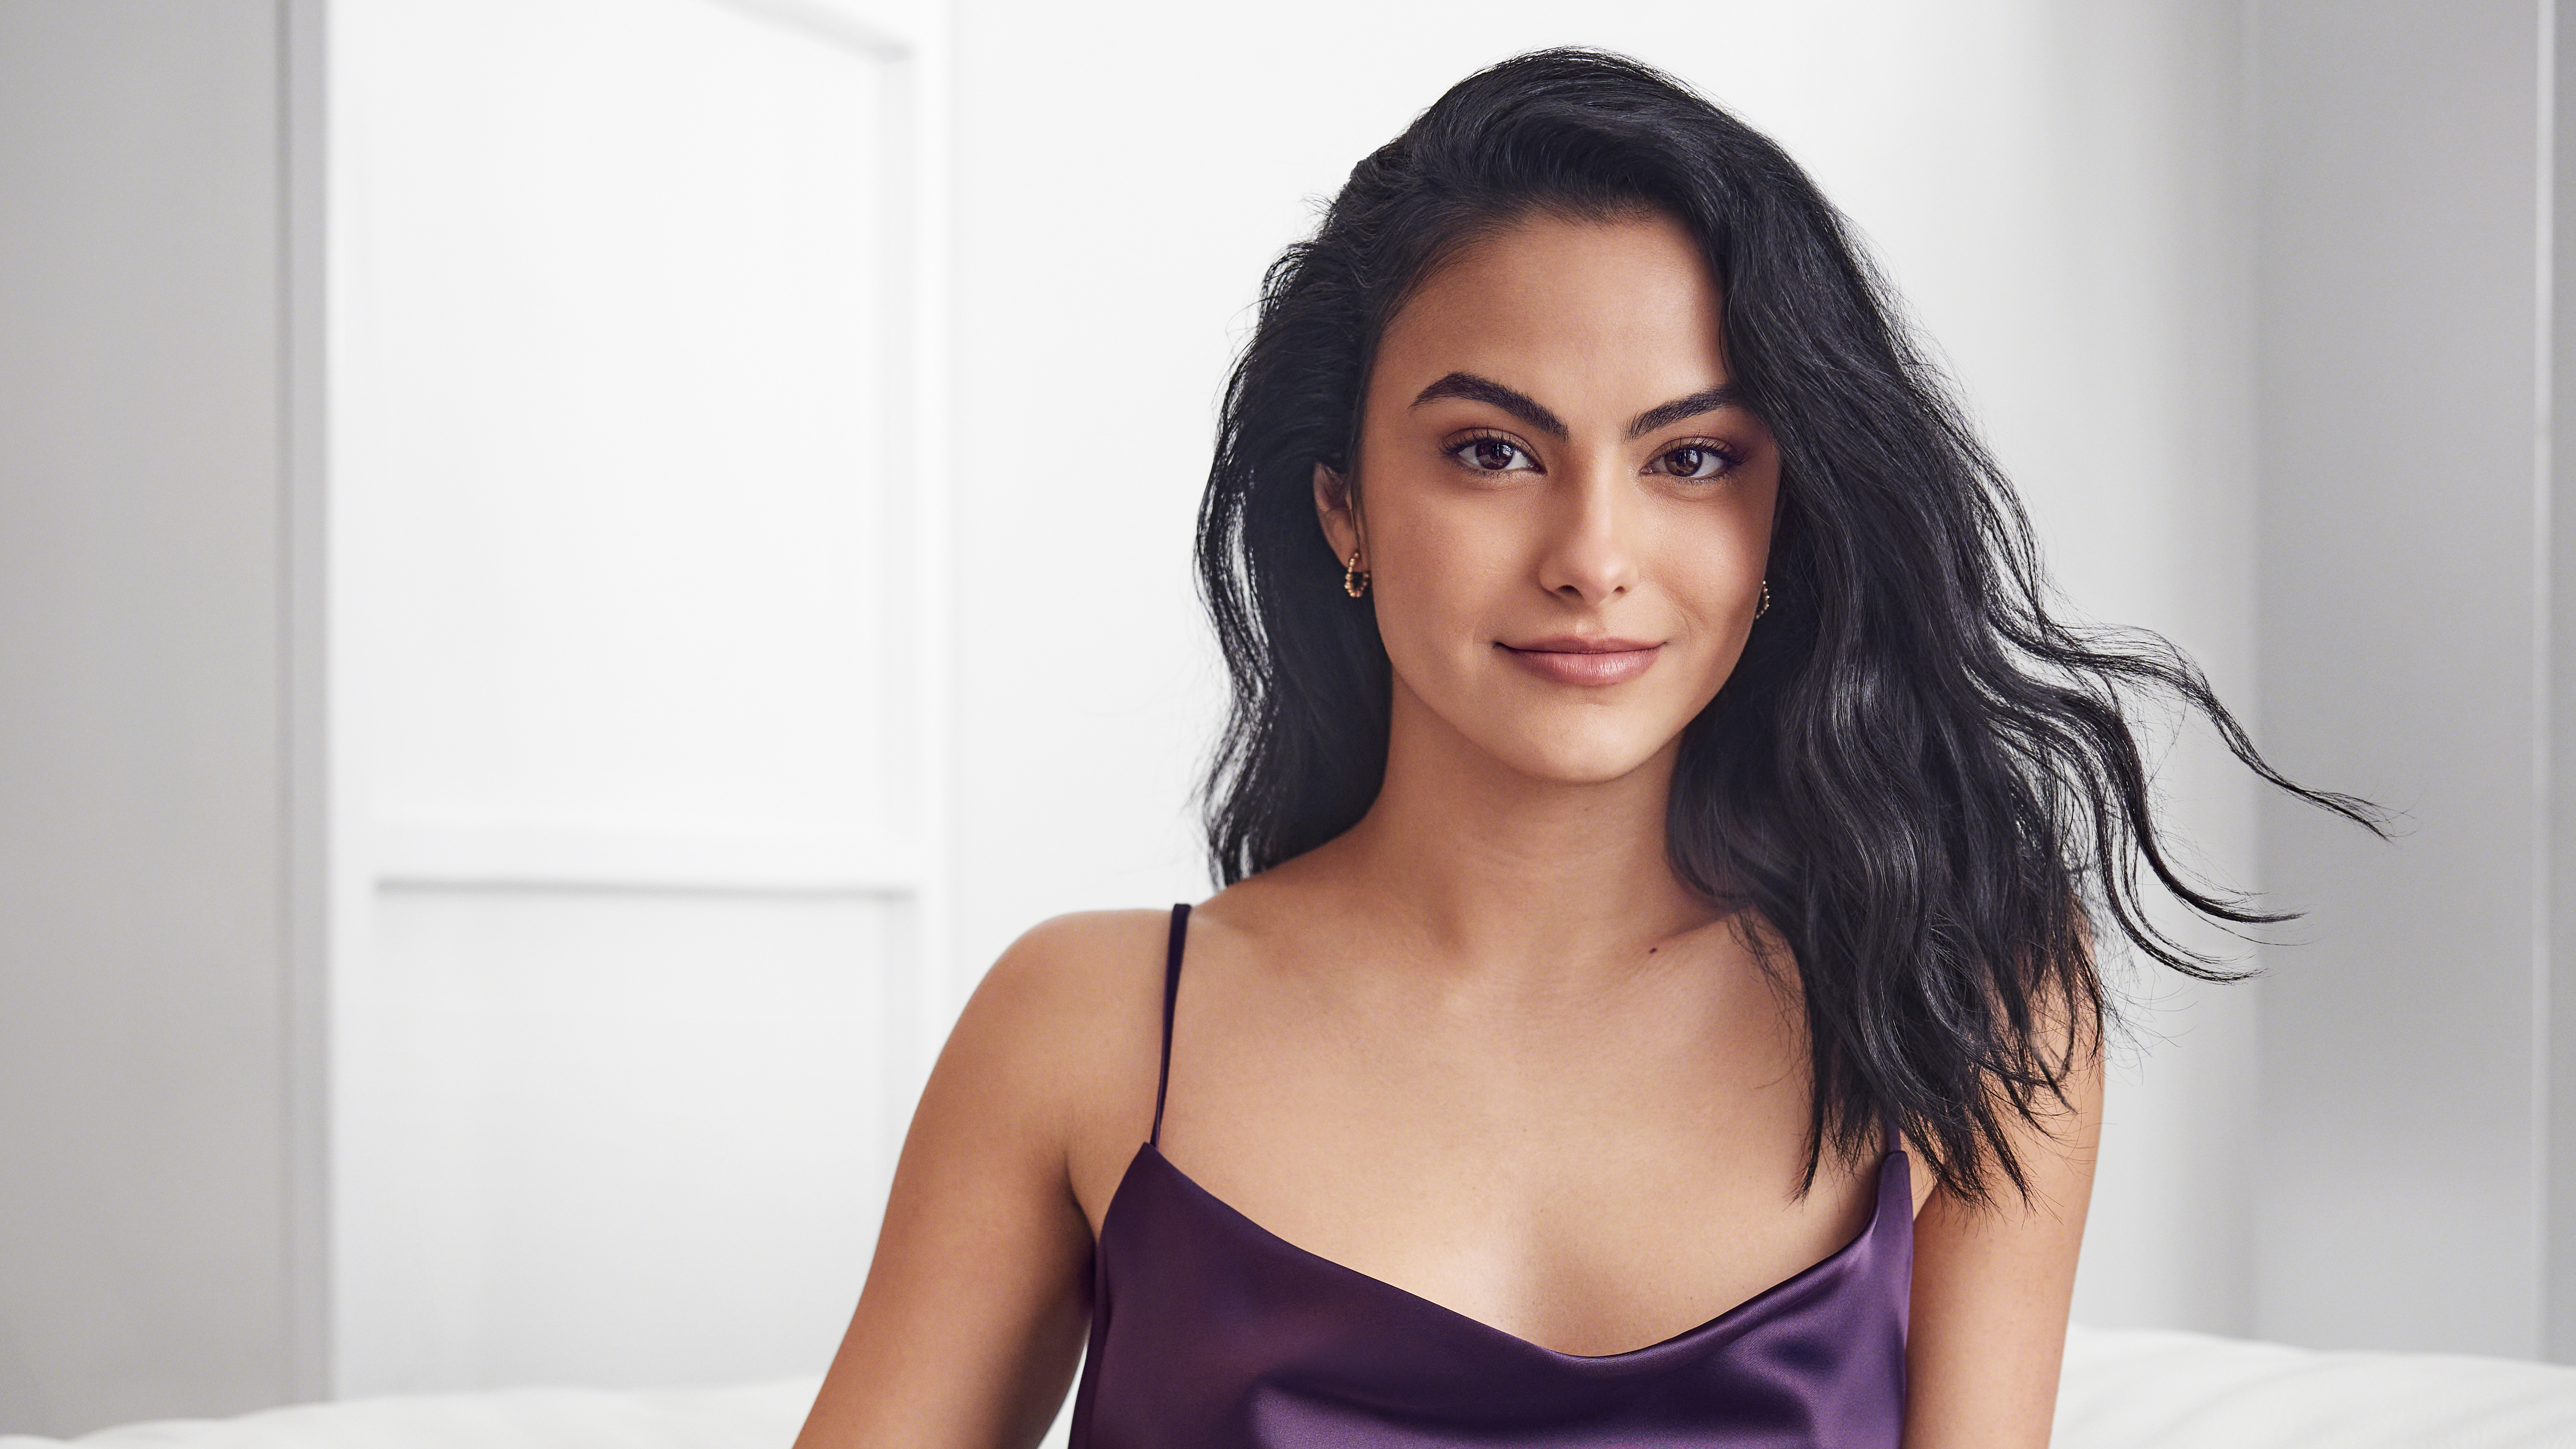 Brunette Camila Mendes in a tank top.